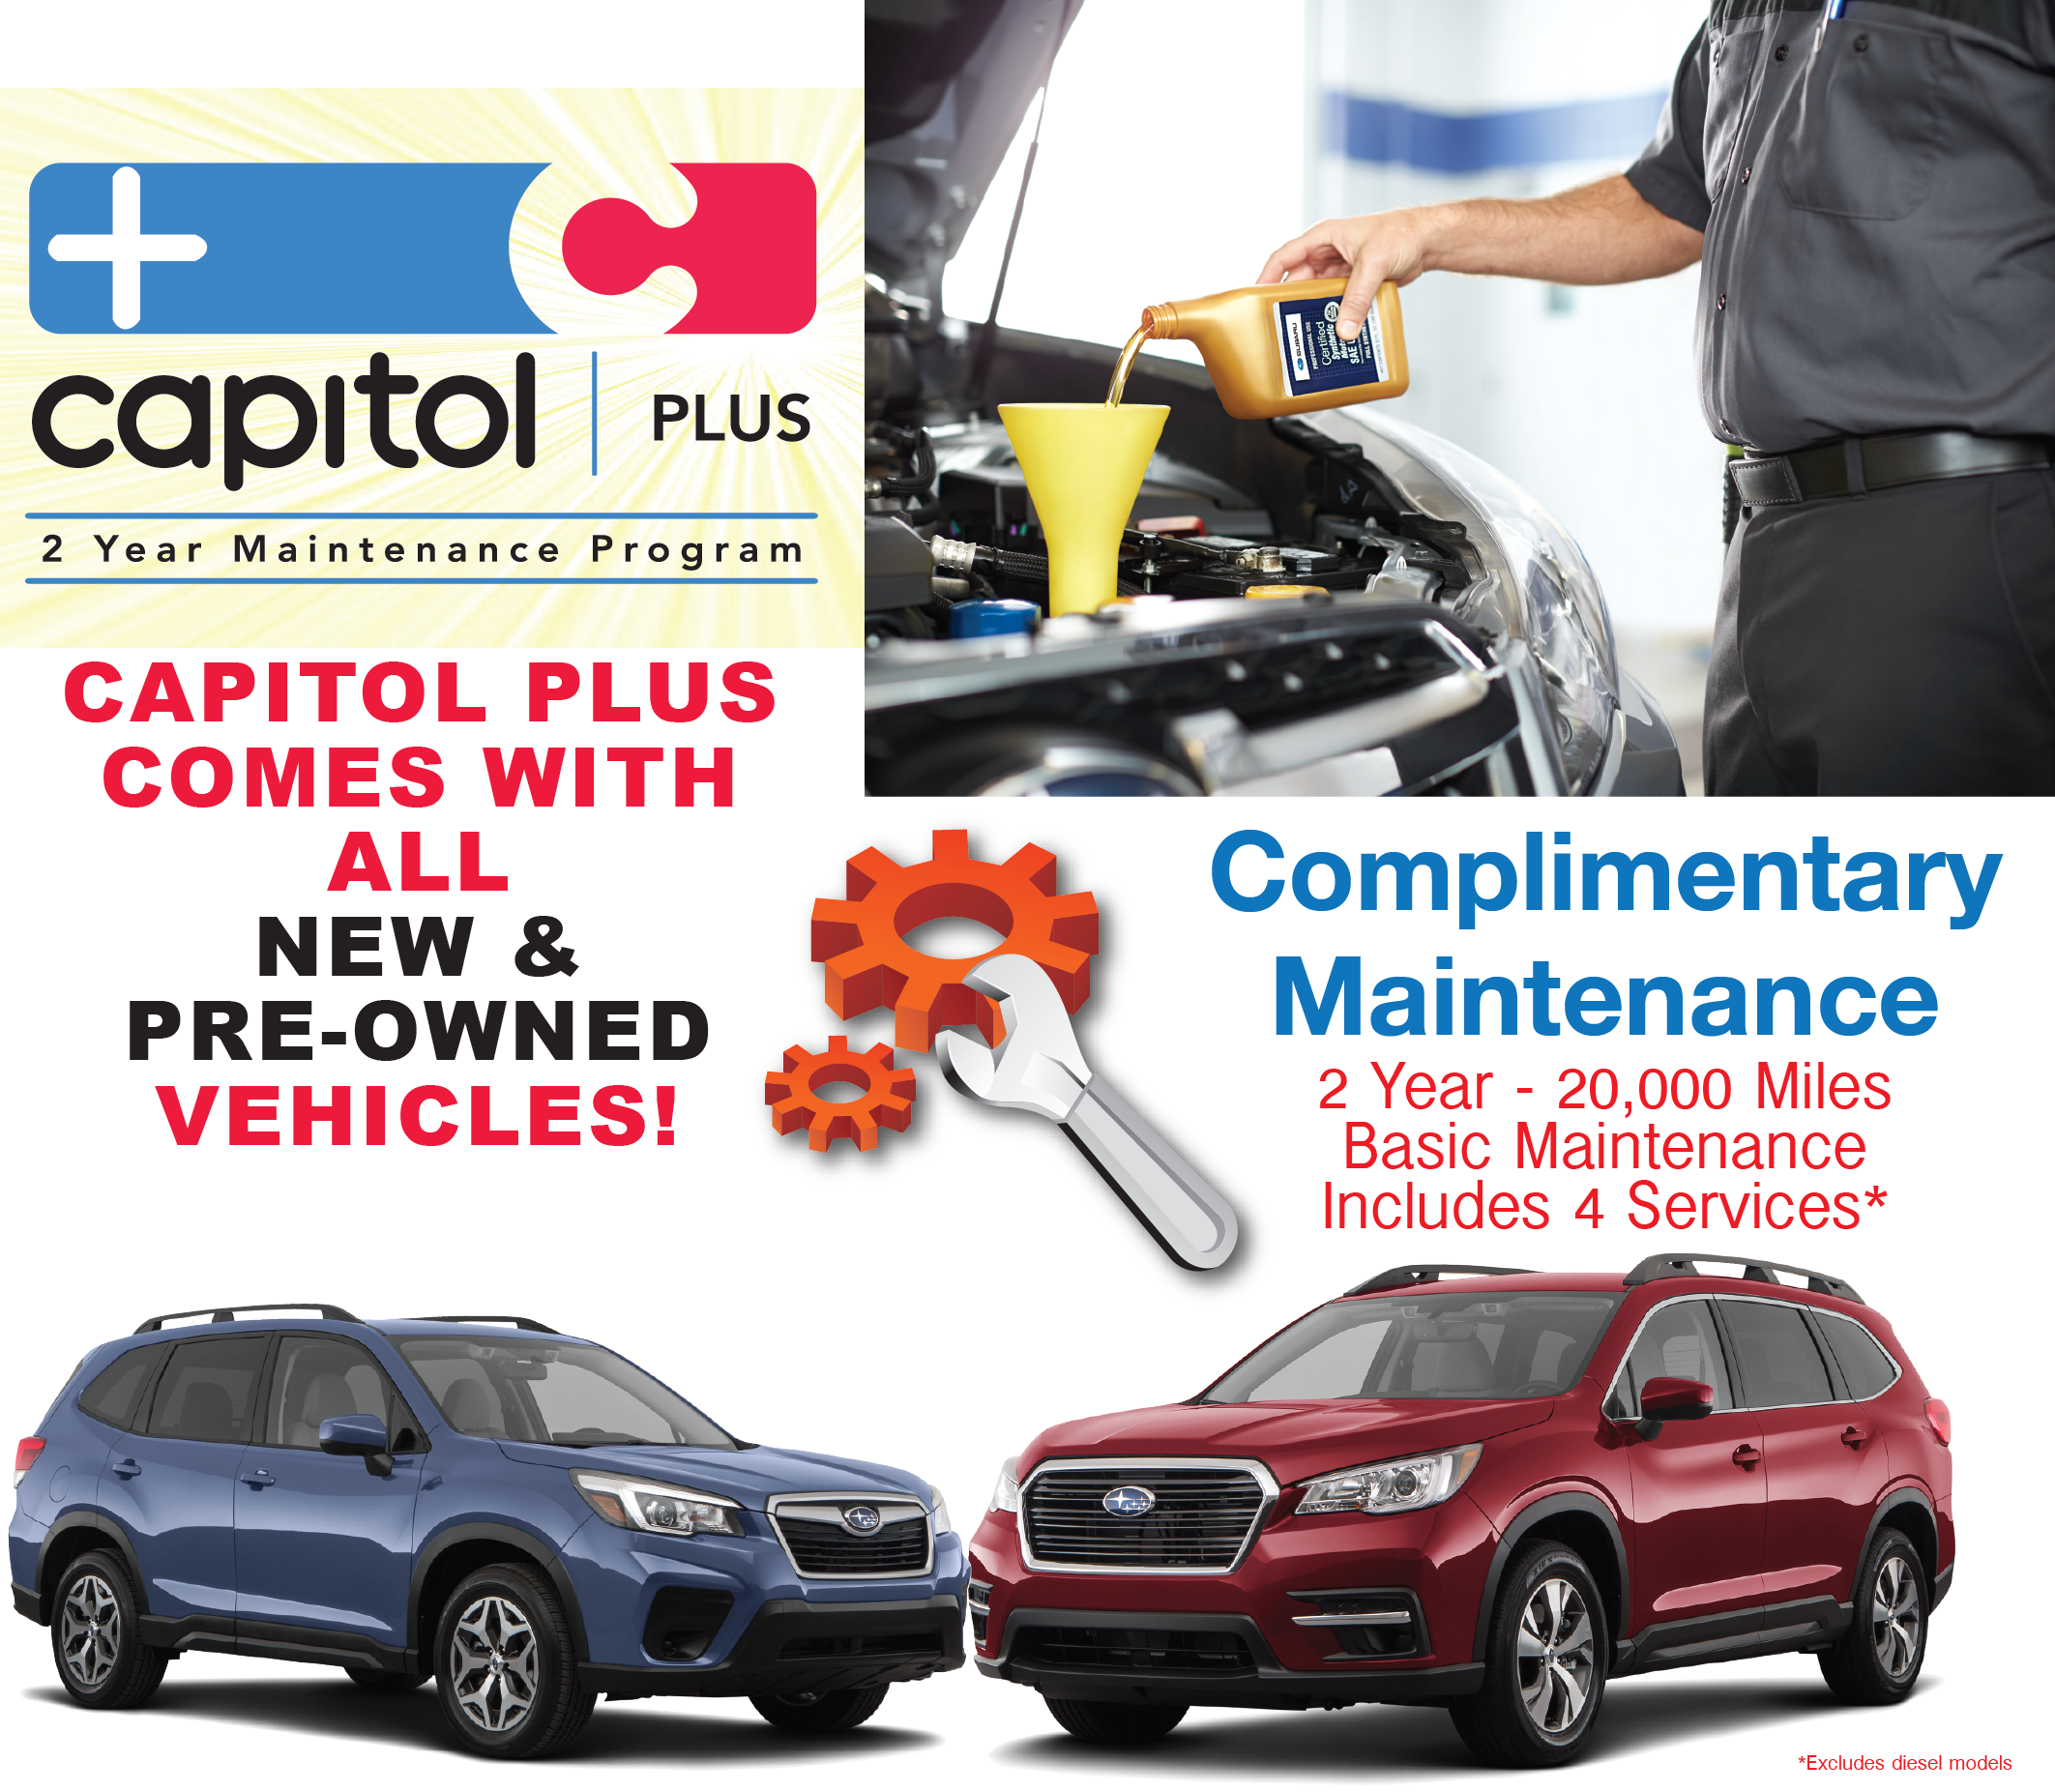 Capitol Plus comes with ALL New & Pre-owned Vehicles!